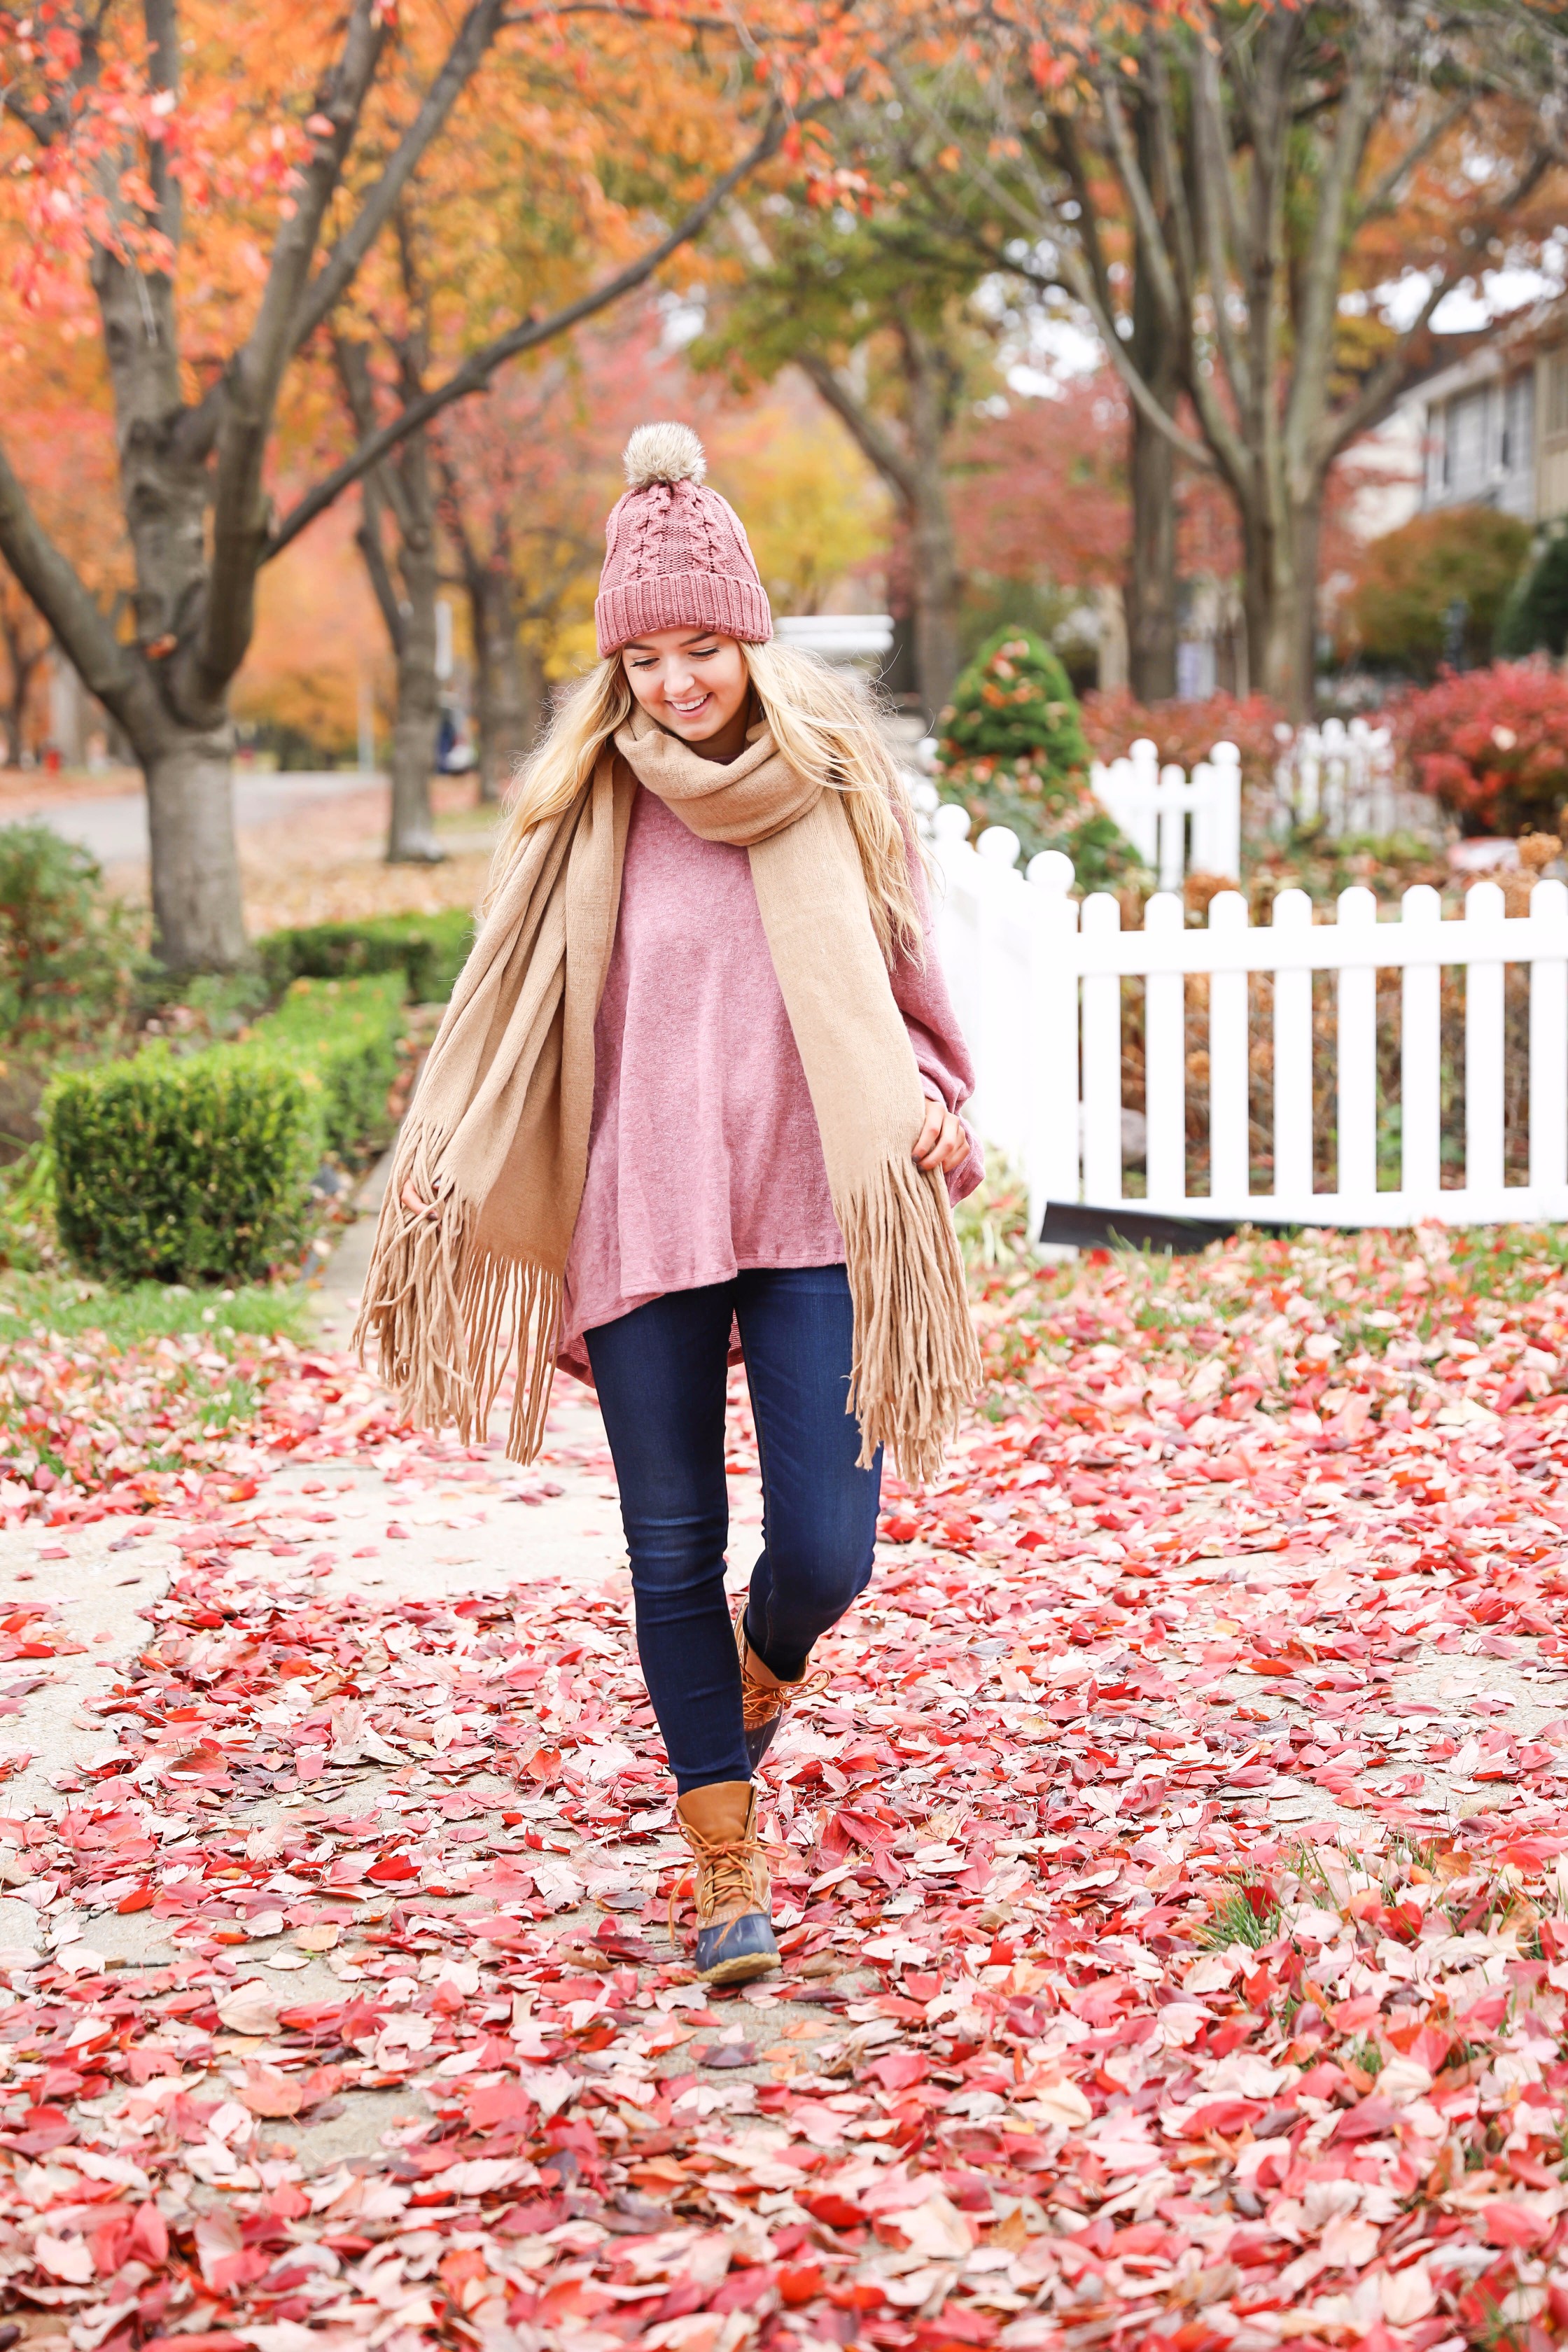 Big fringe scarf with pink tied sweater and pink beanie! Perfect girly fall outfit! Find details on fashion blog daily dose of charm by lauren lindmark